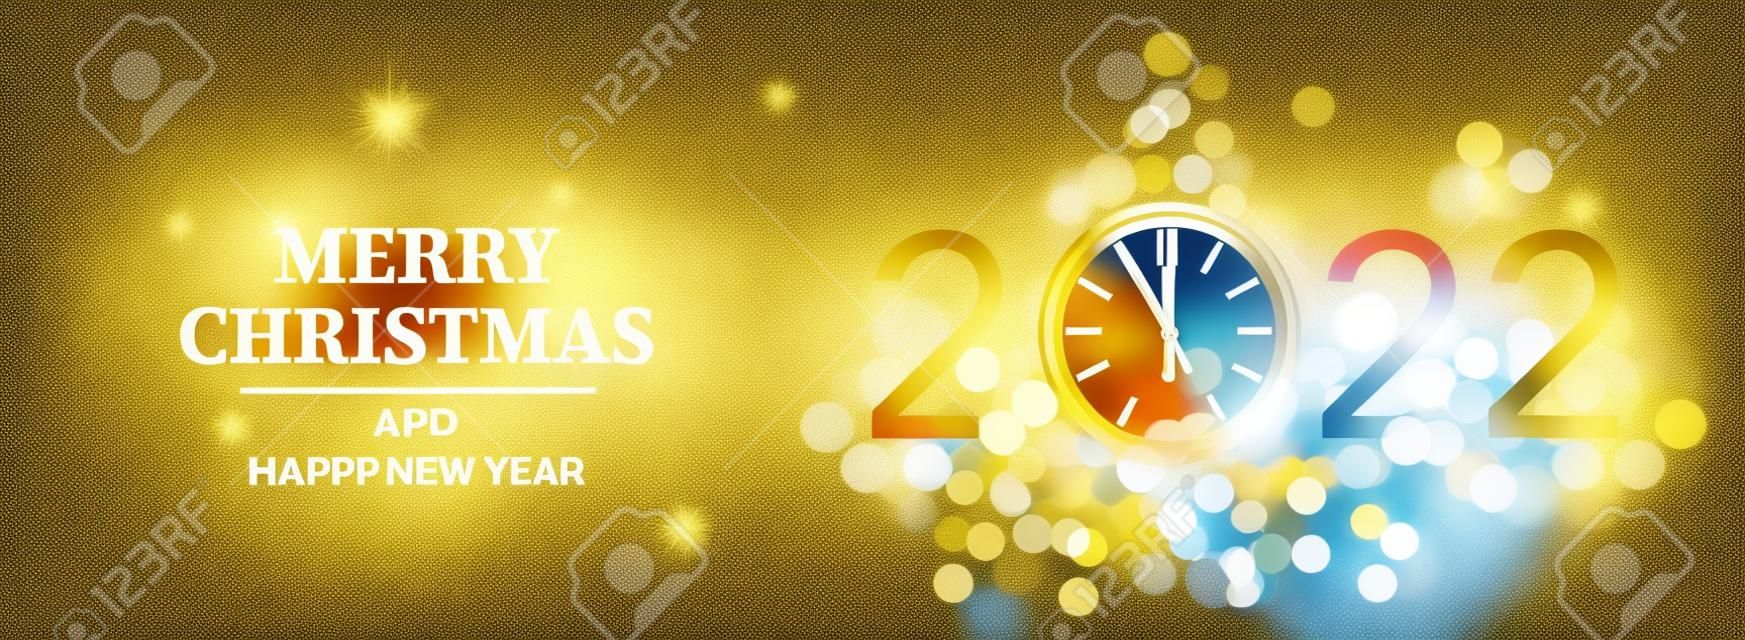 Merry Christmas and Happy New Year 2022 - Shining background with gold clock and Christmas tree sparkle blur bokeh effect, vector illustration